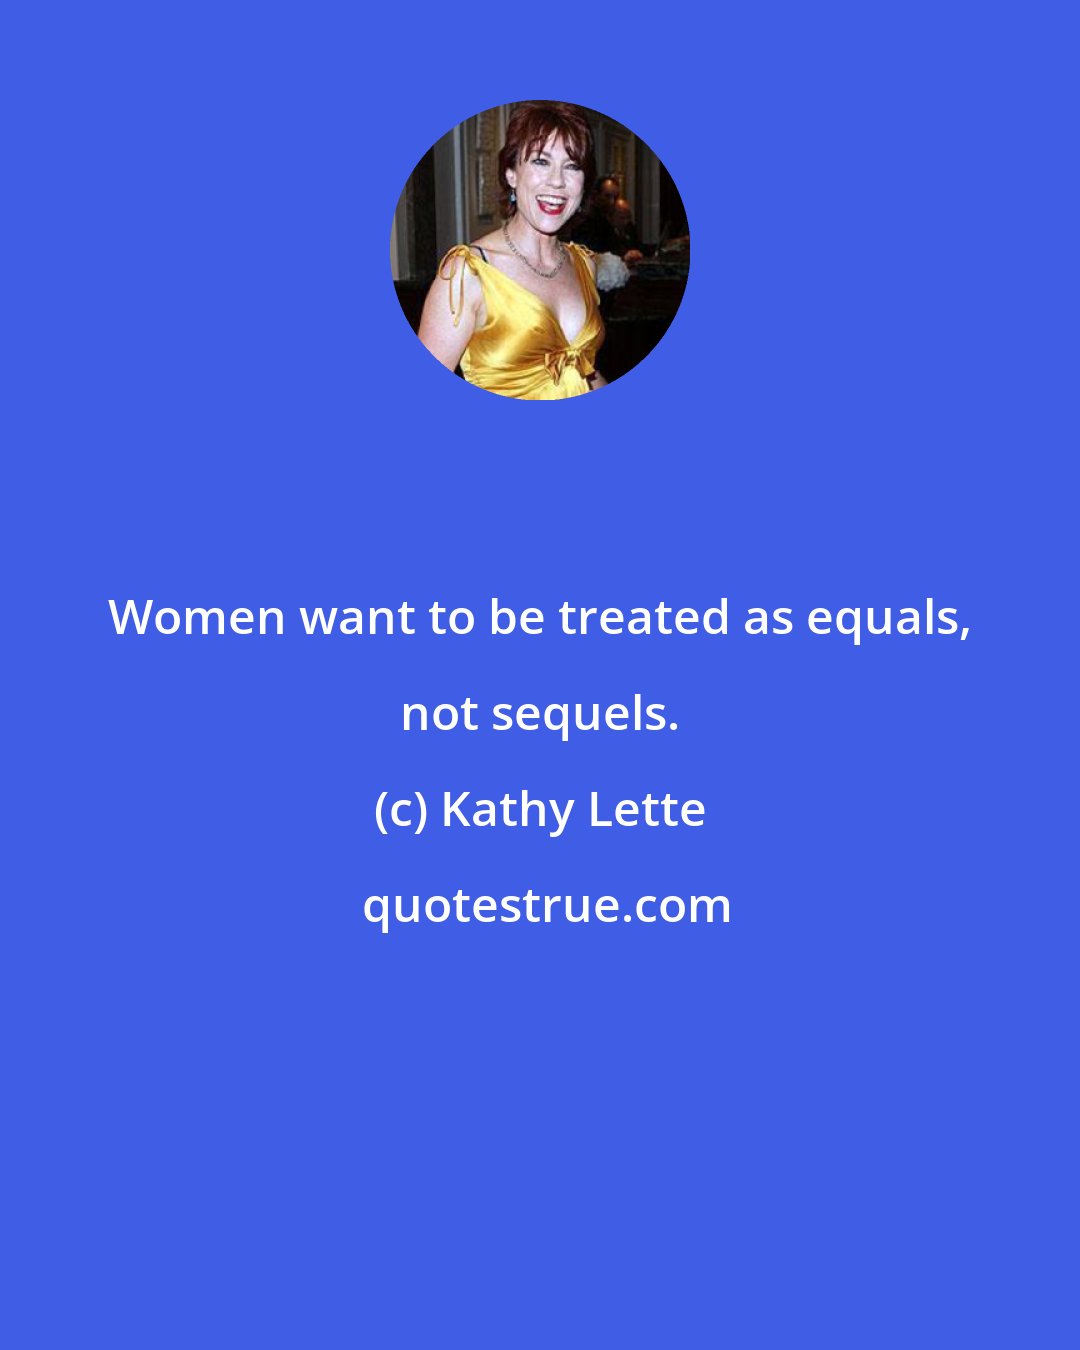 Kathy Lette: Women want to be treated as equals, not sequels.